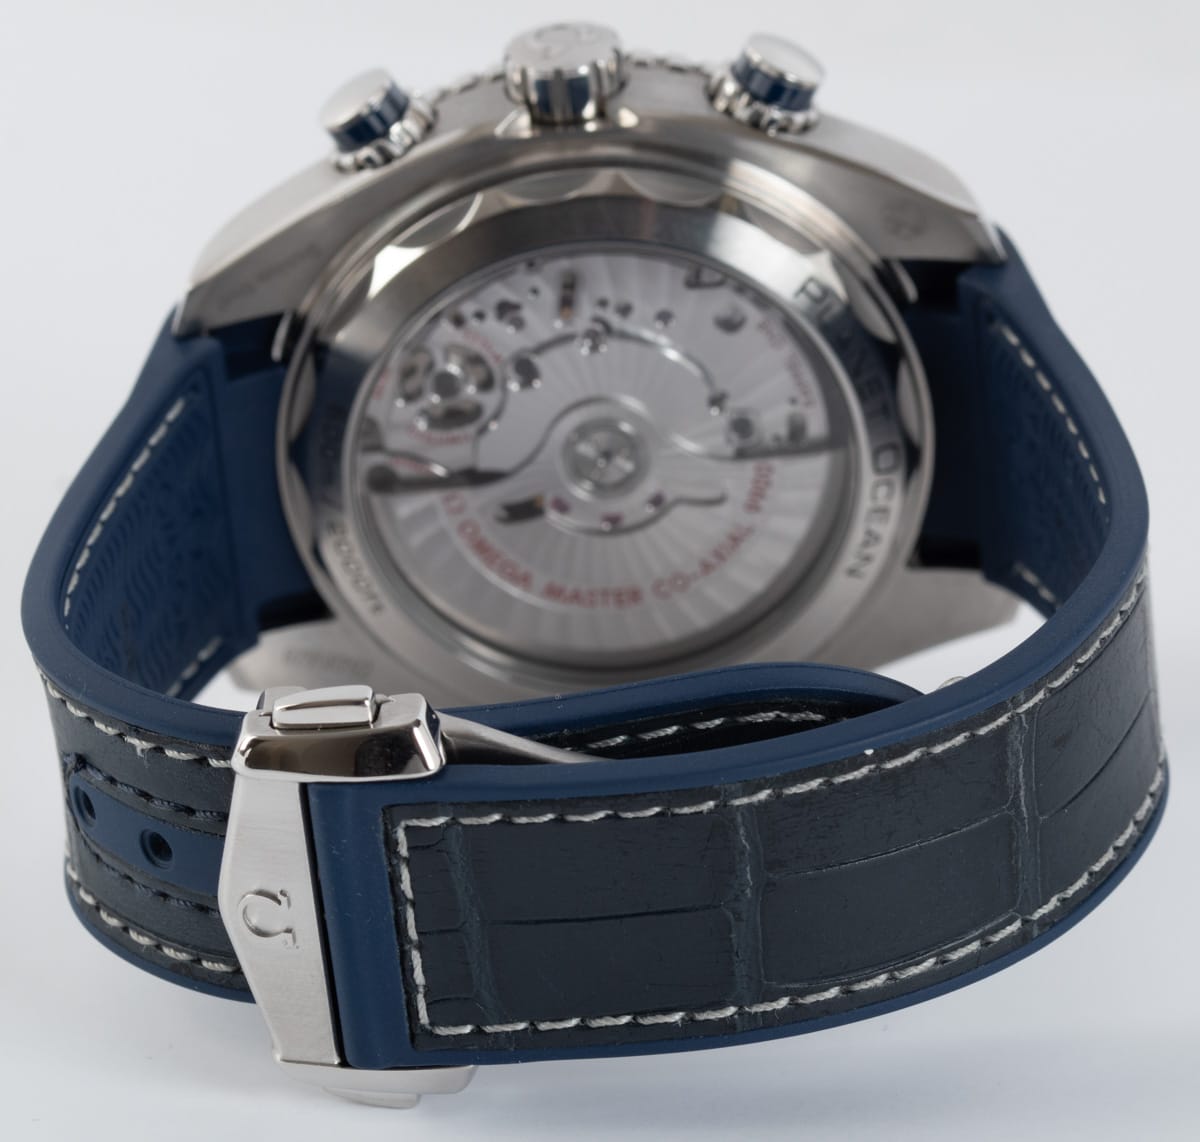 Rear / Band View of Seamaster Planet Ocean Master Chronometer Chronograph